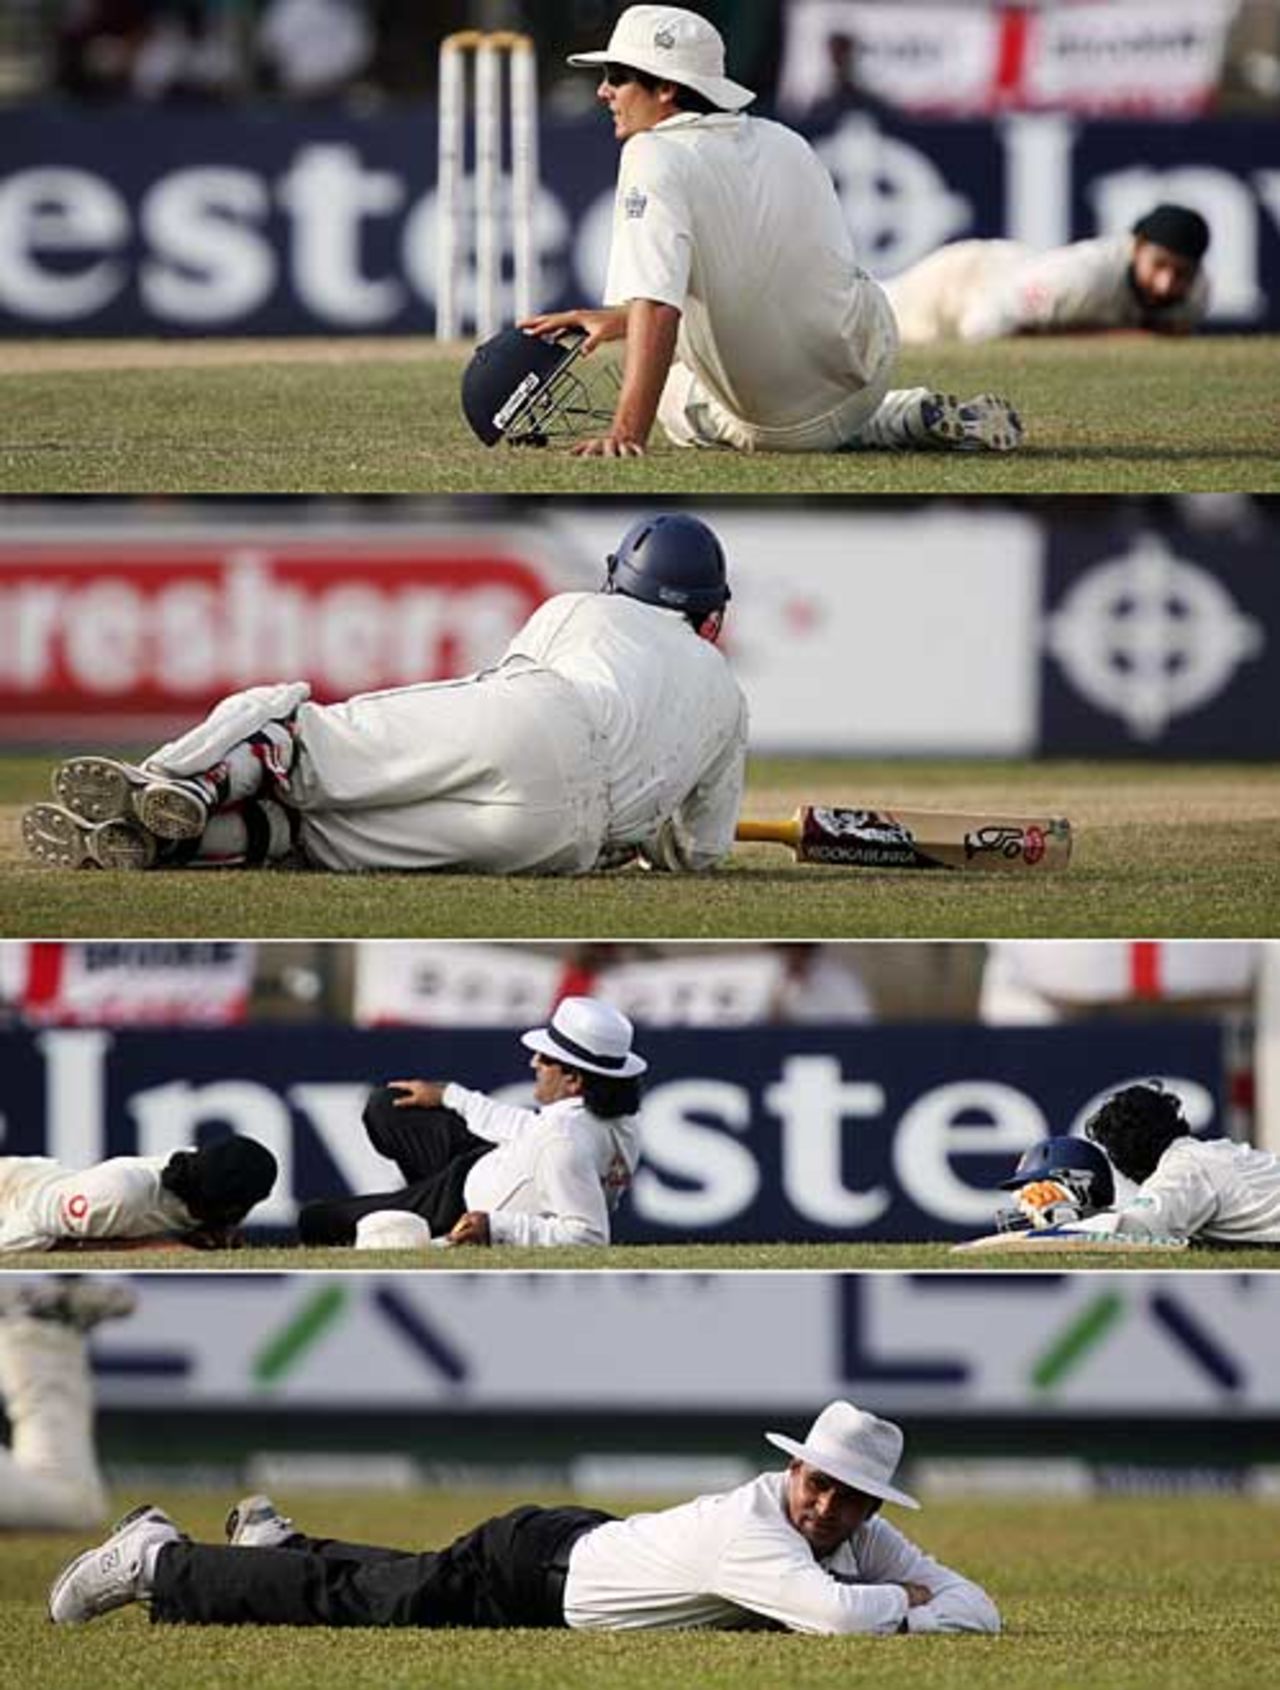 Players and umpires dive for cover as swarm of bees crosses the ground, Sri Lanka v England, 1st Test, Kandy, December 4, 2007